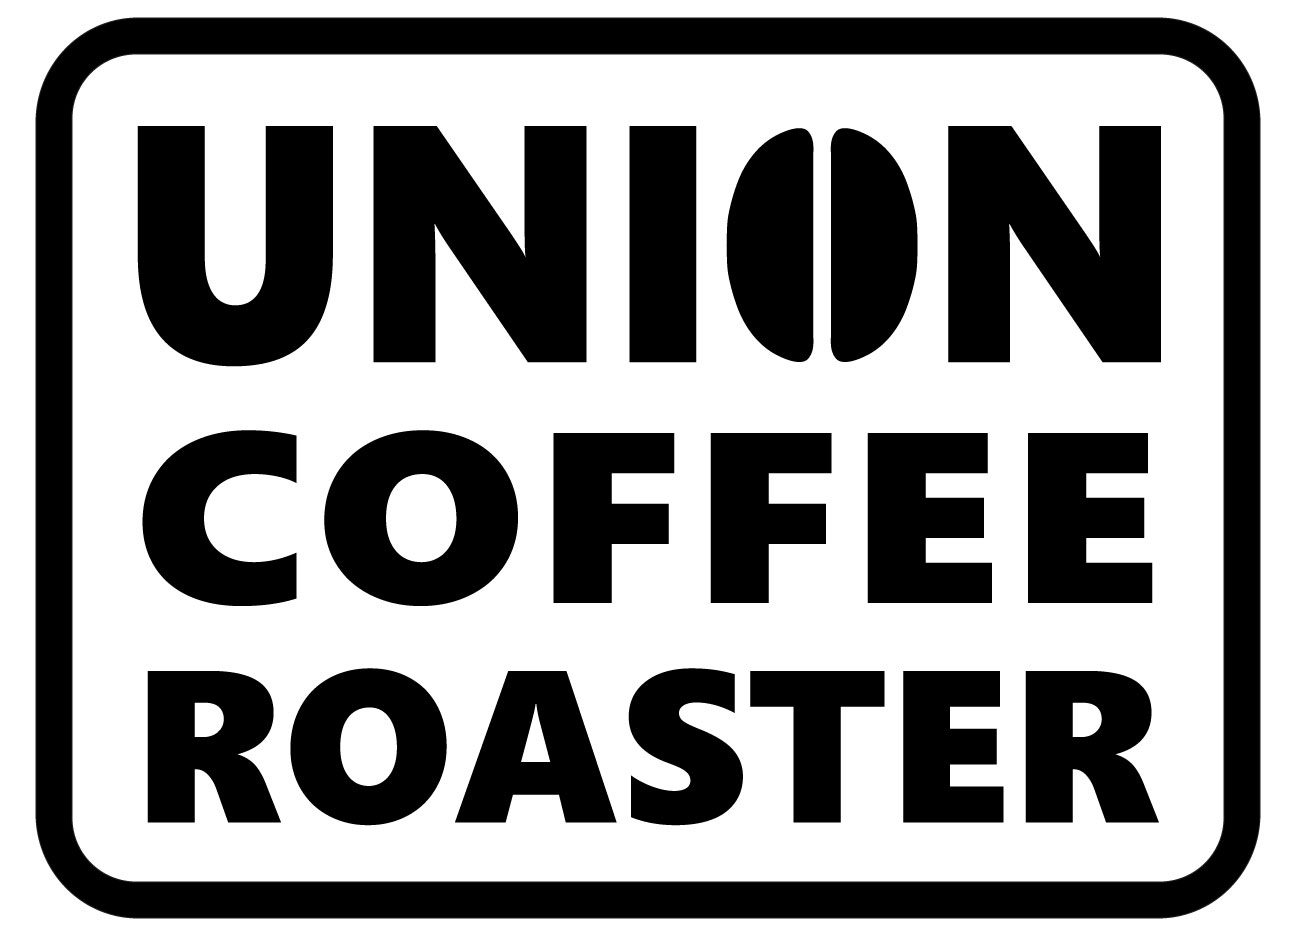 Our Coffee — Union Coffee